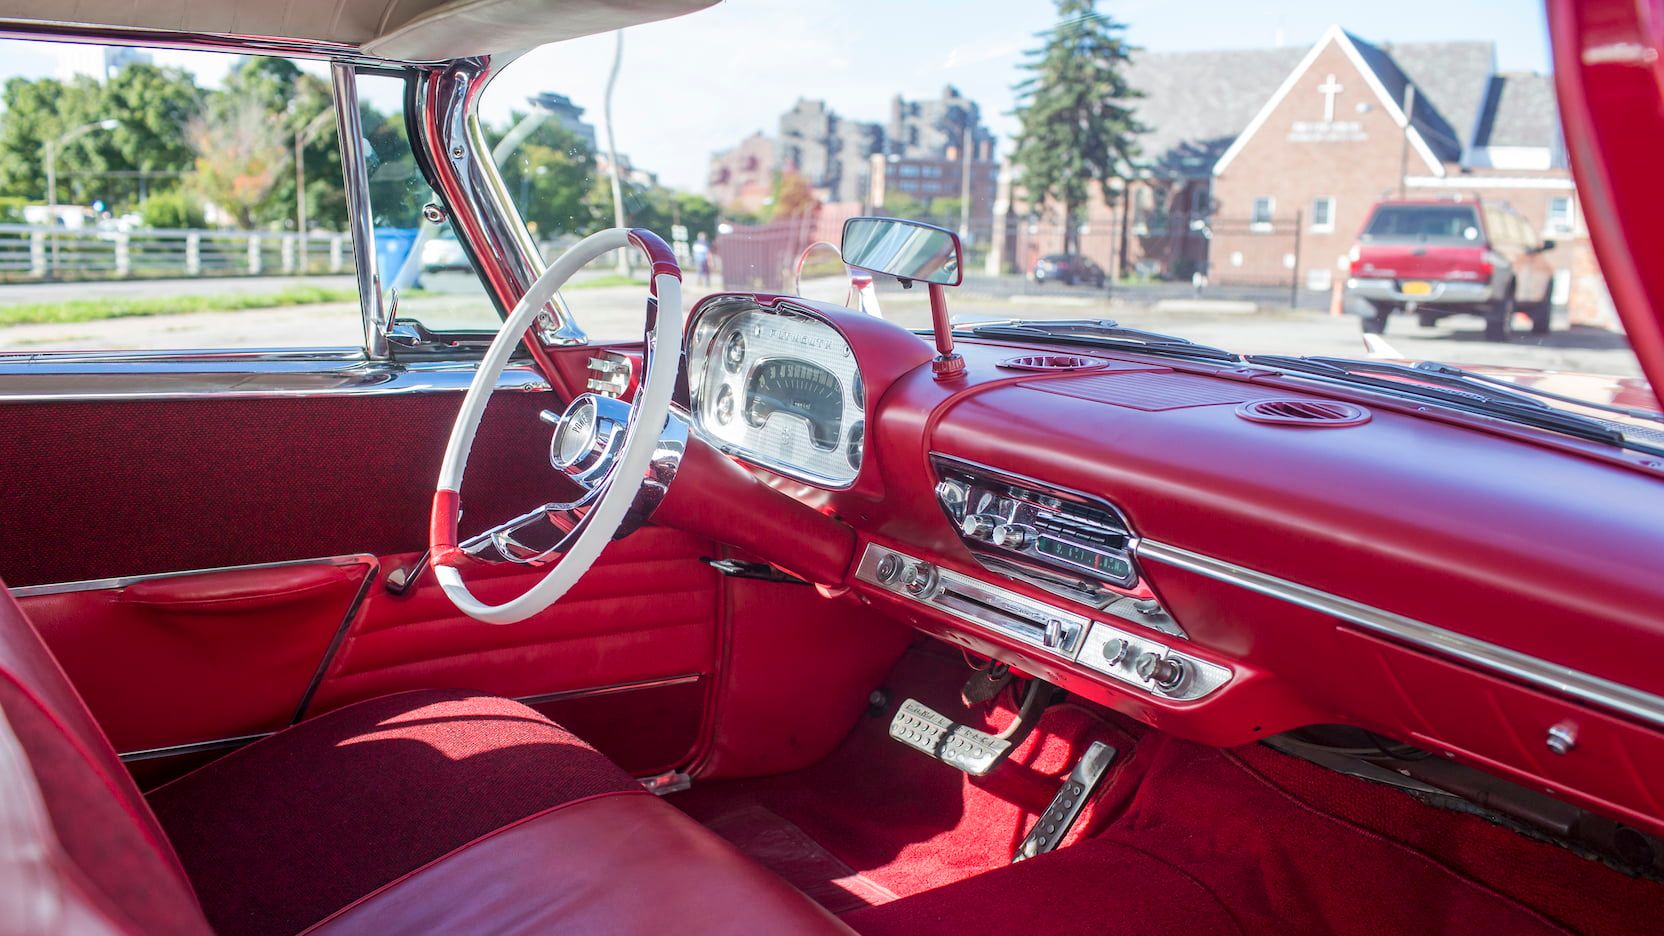 1958 Plymouth Fury interior view